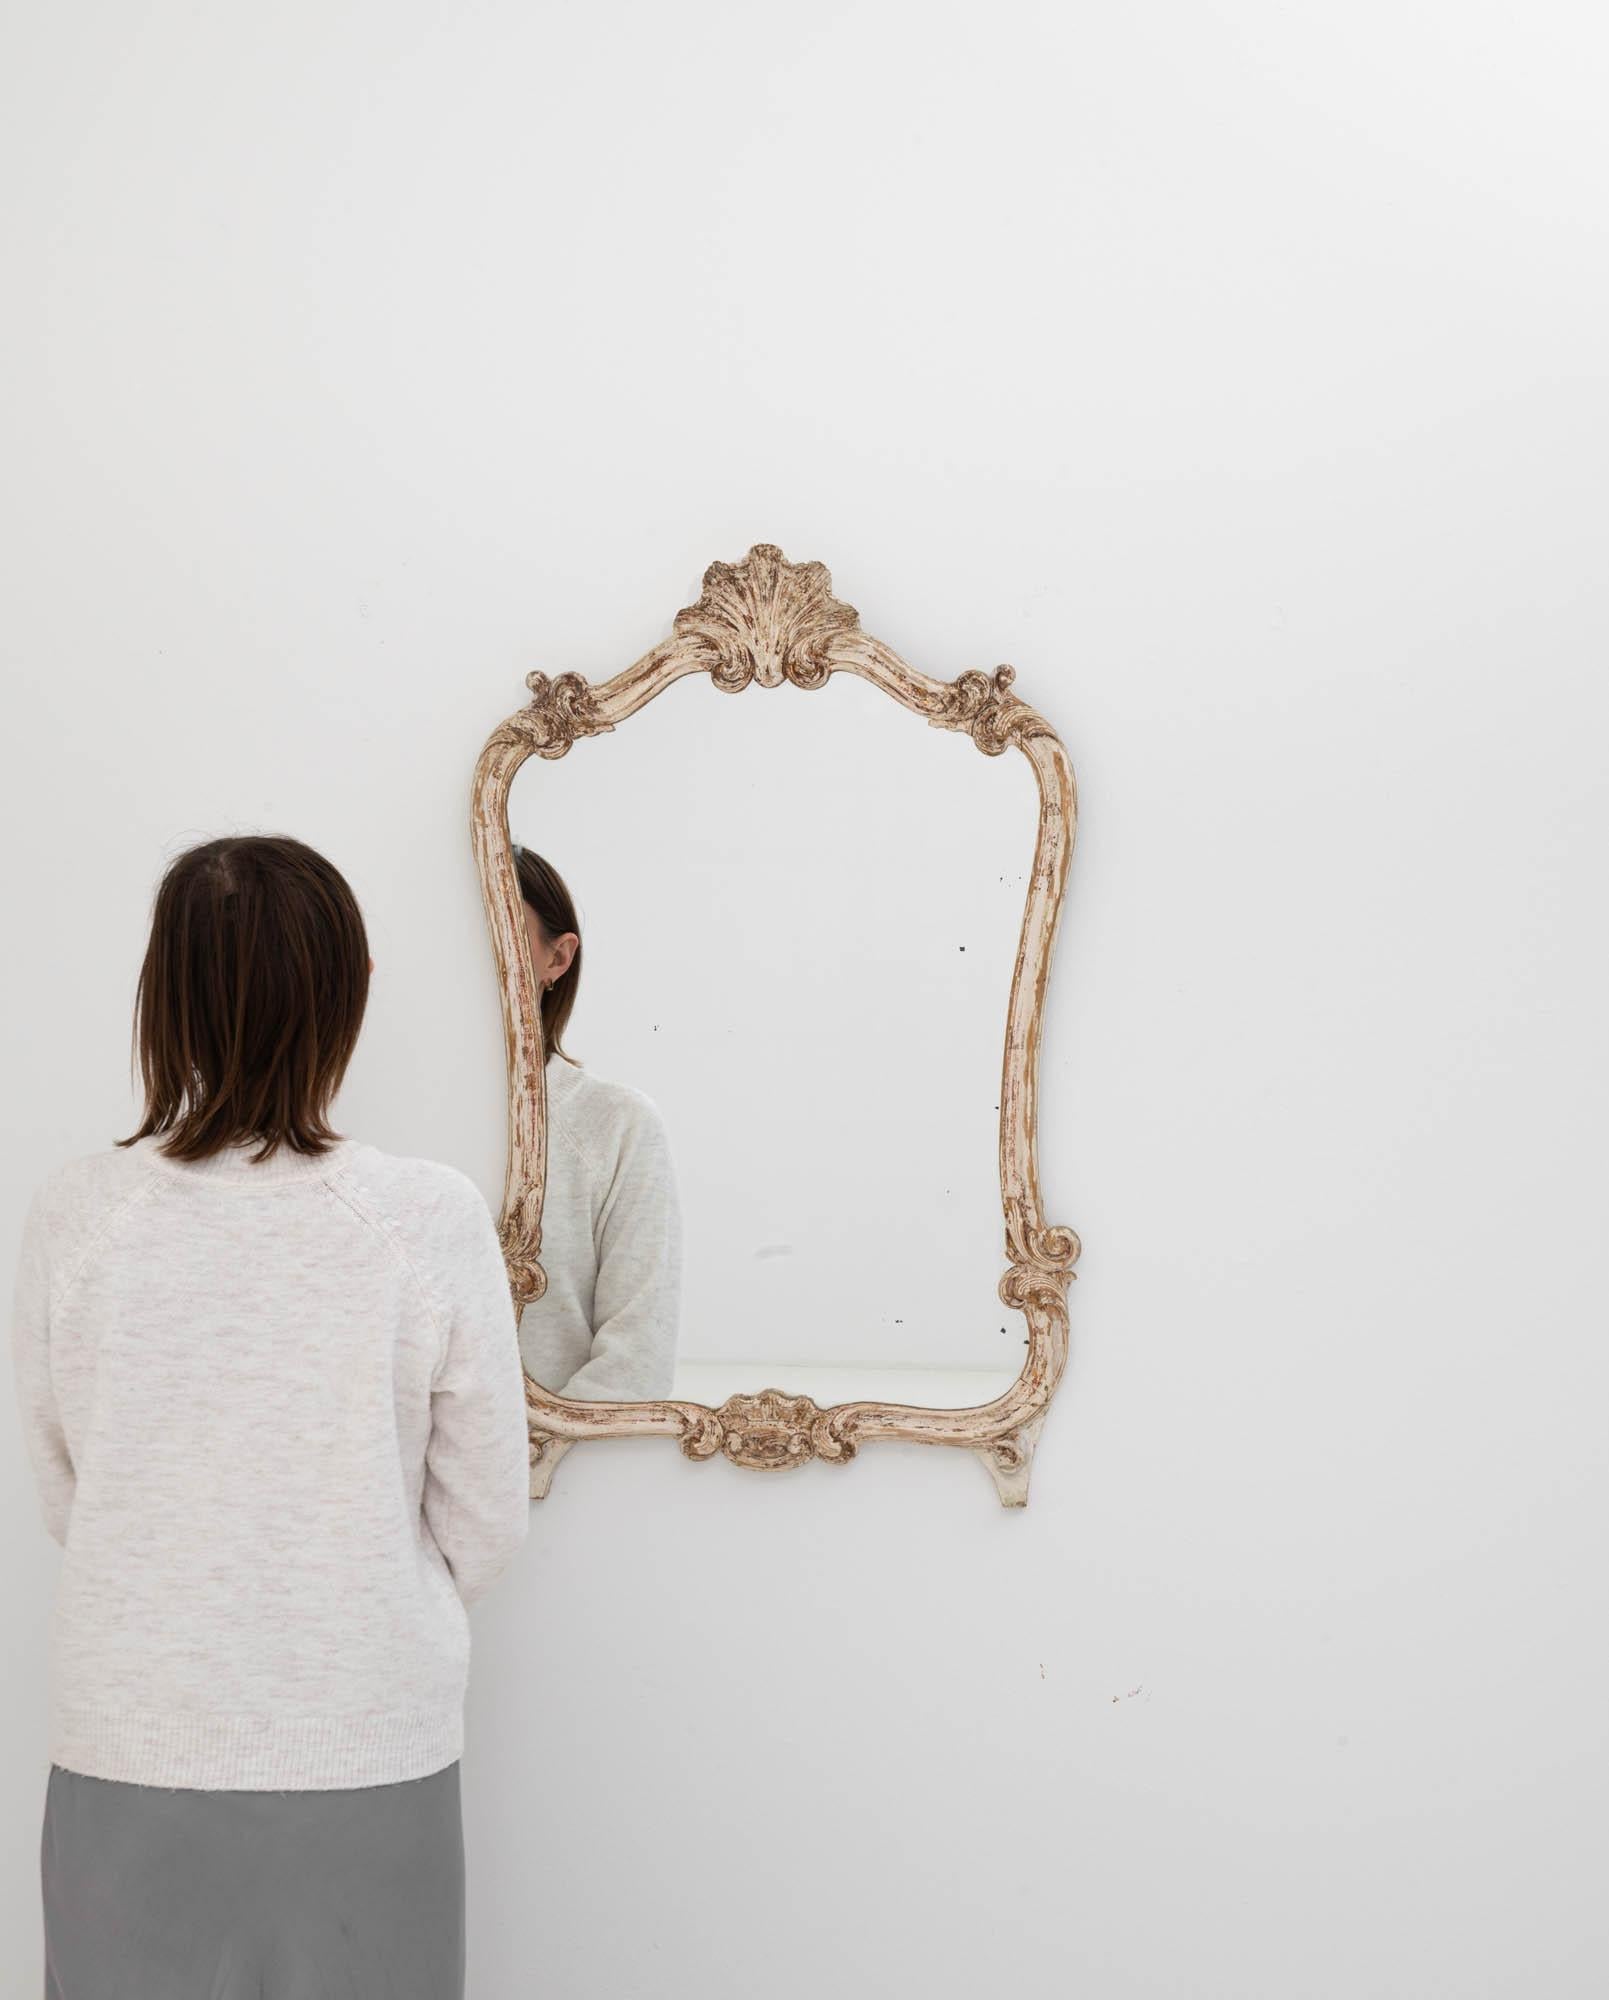 Step into a world where the elegance of the 20th century Italian design meets the rustic charm of a time-worn treasure with this exquisite white patinated wood mirror. The curvaceous silhouette is accentuated by ornate carvings that flourish at the